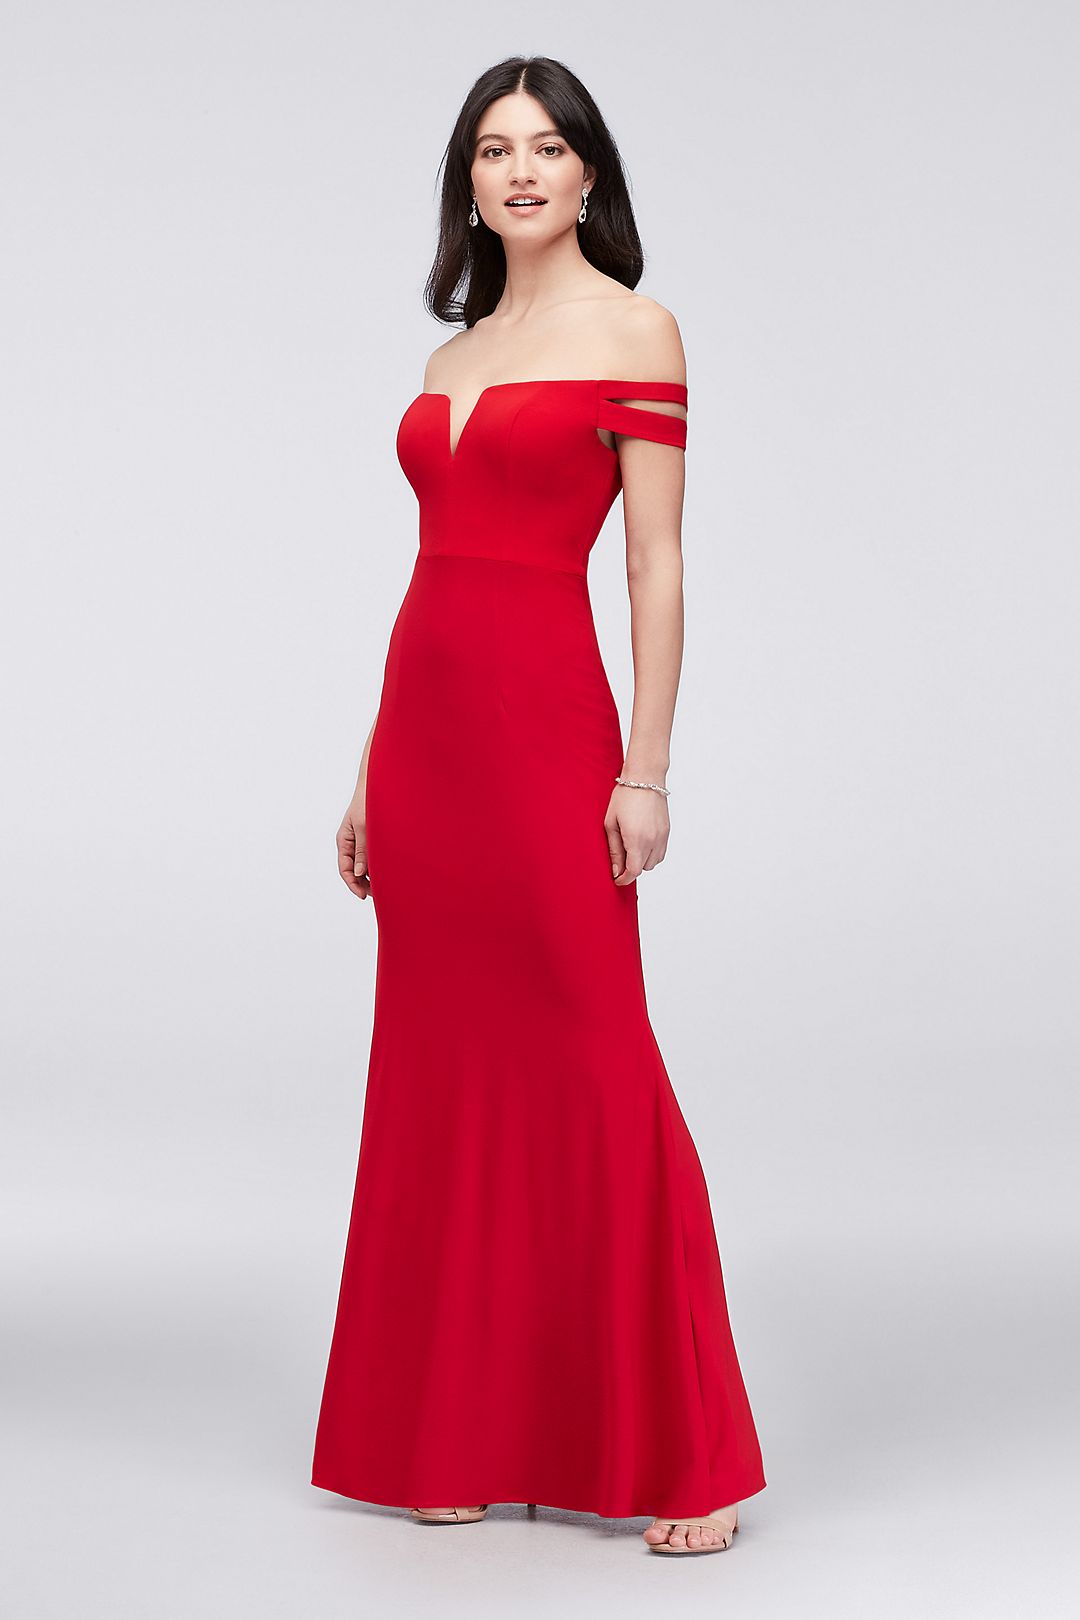 Double-Strap Off-the-Shoulder Jersey Sheath Dress Image 1